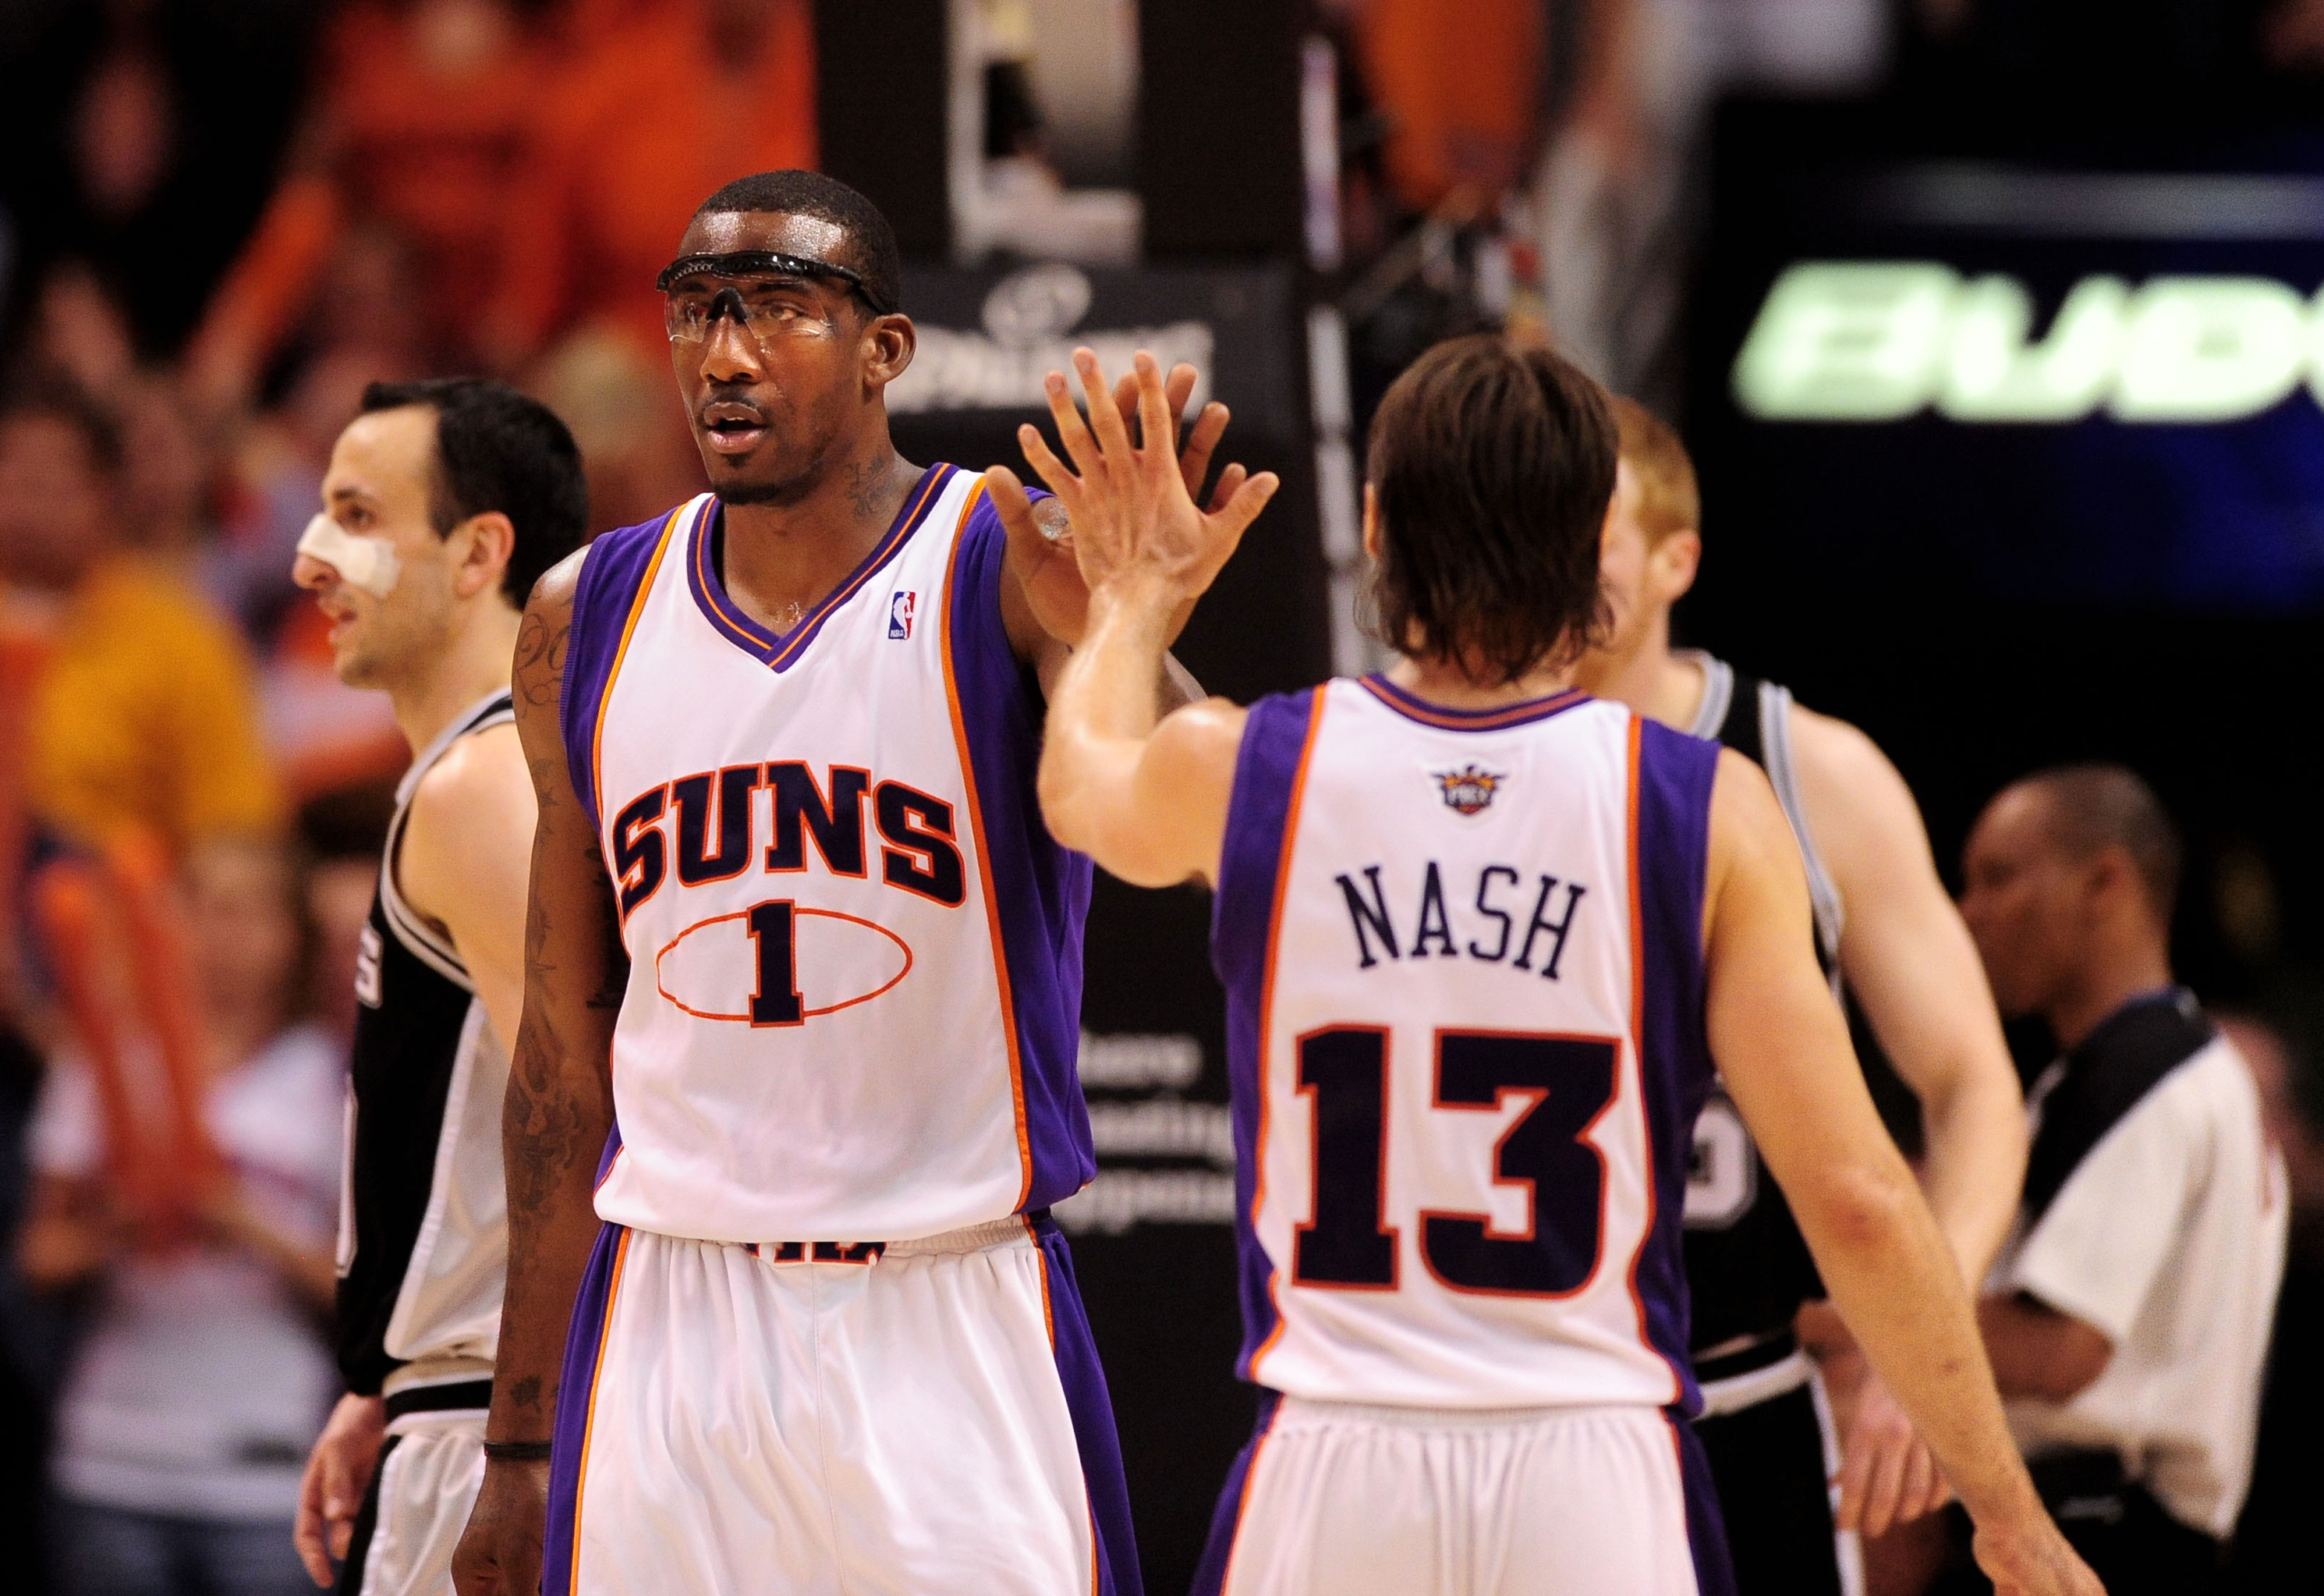 Knicks' Amare Stoudemire Named Second-Team All-NBA - Amar'e Stoudemire